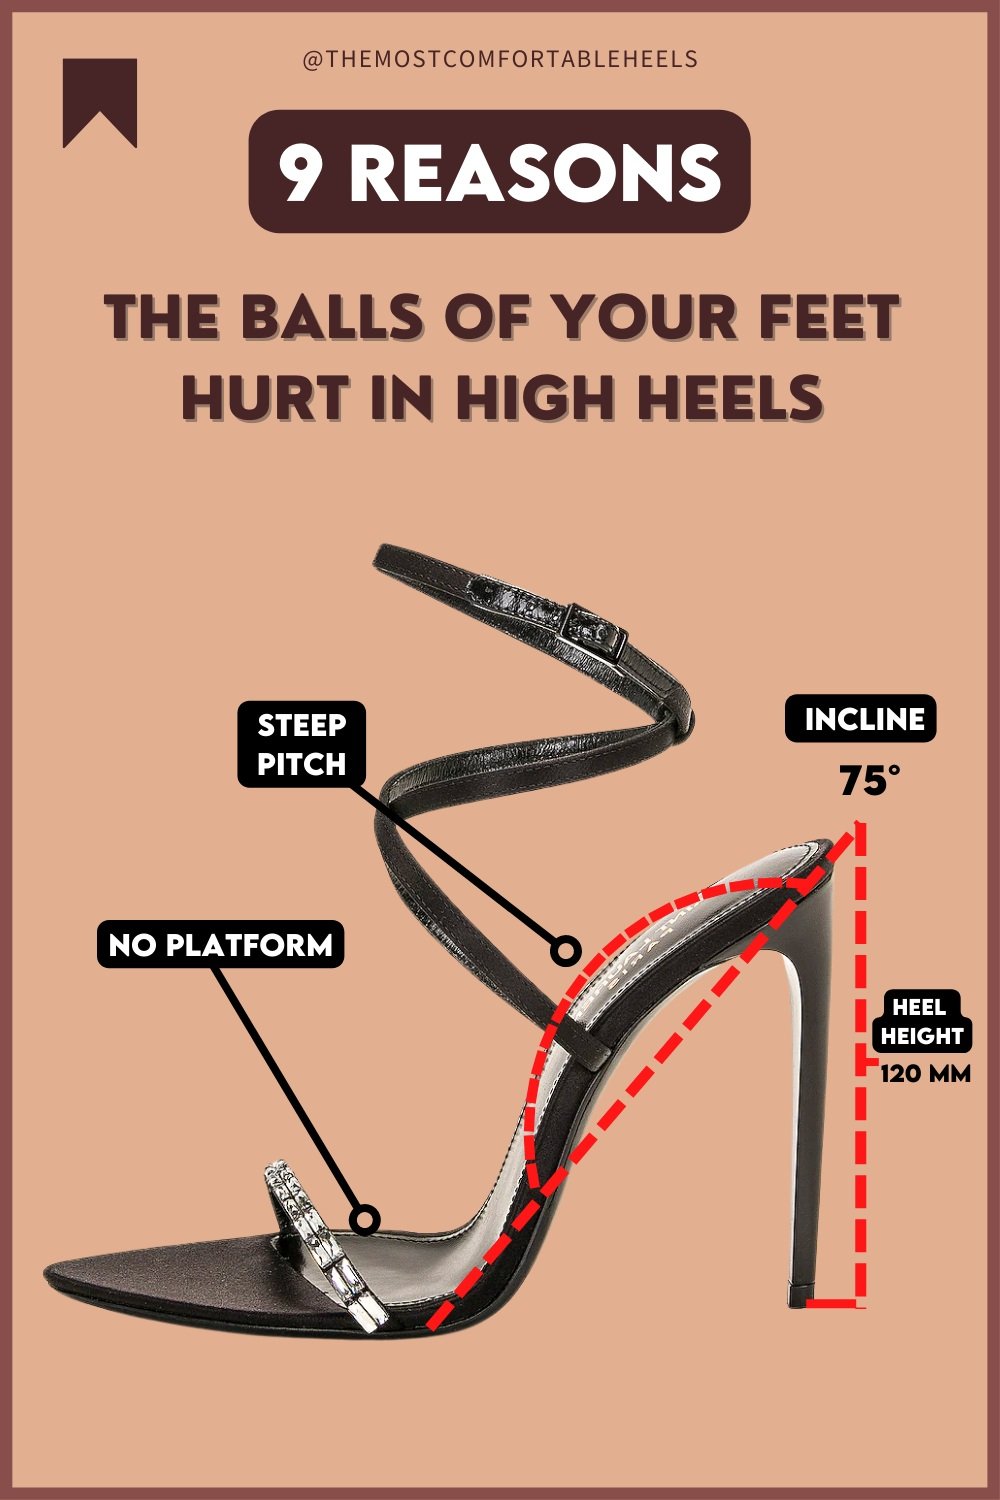 Guide to high heel heights – Work pumps